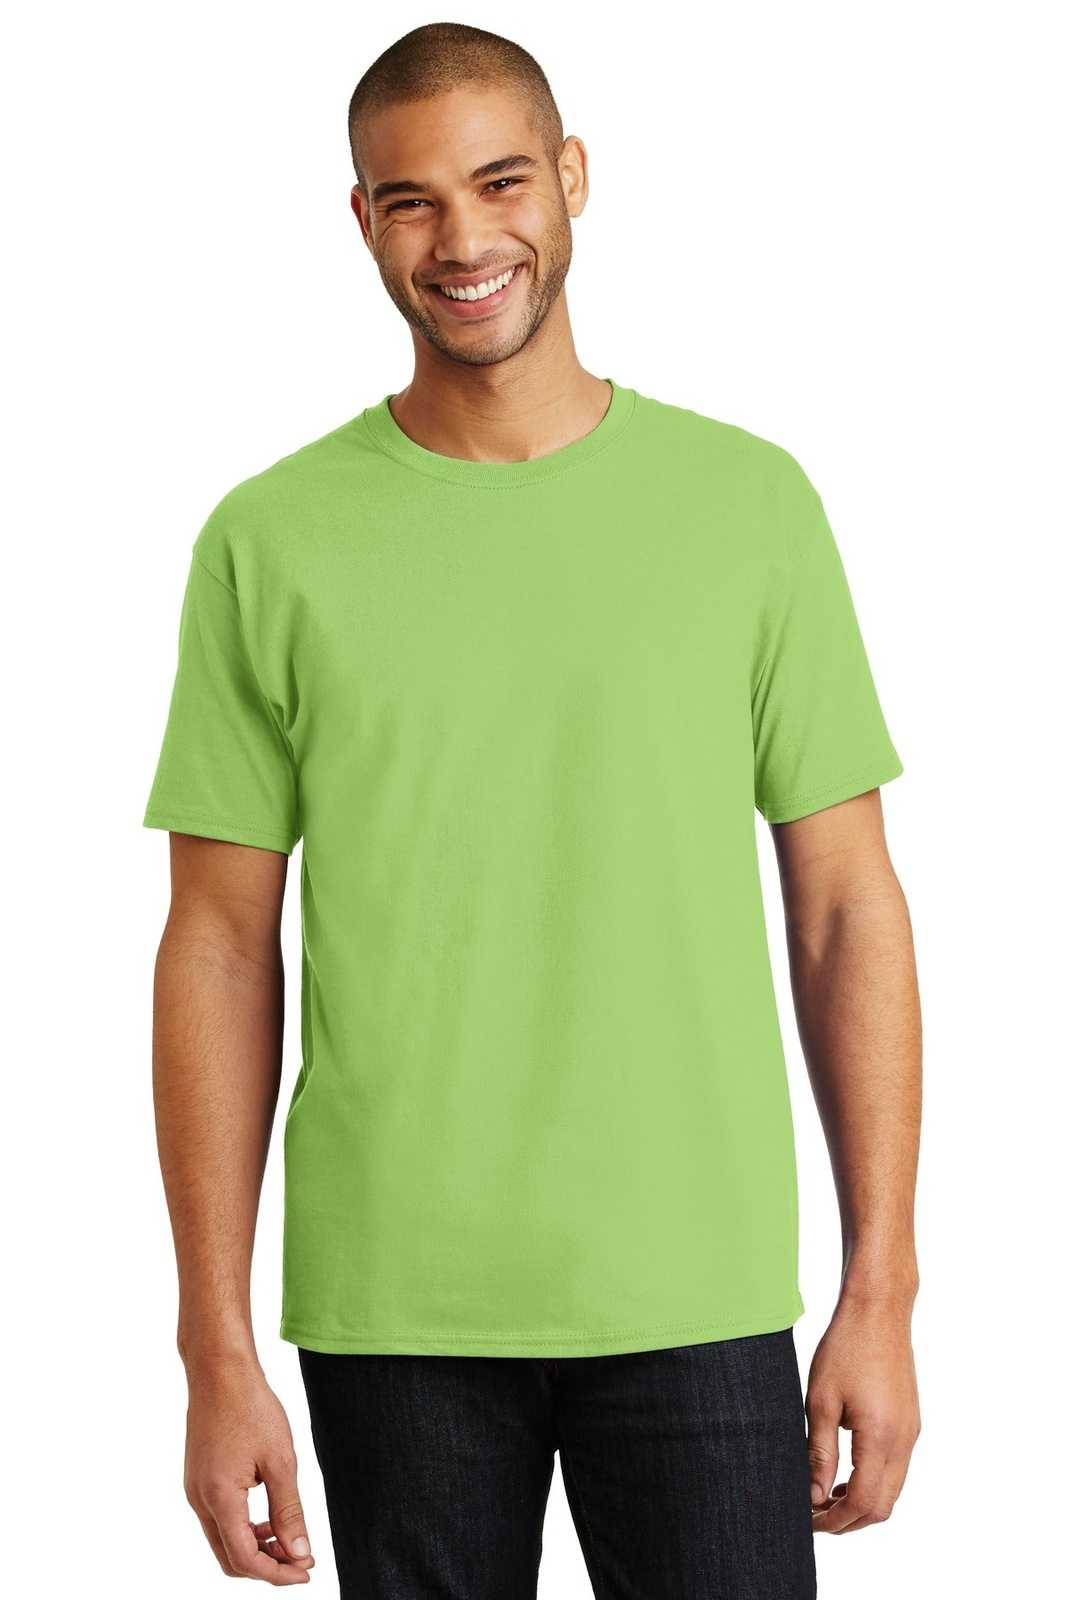 Hanes 5250 Tagless 100% Cotton T-Shirt - Lime - HIT a Double